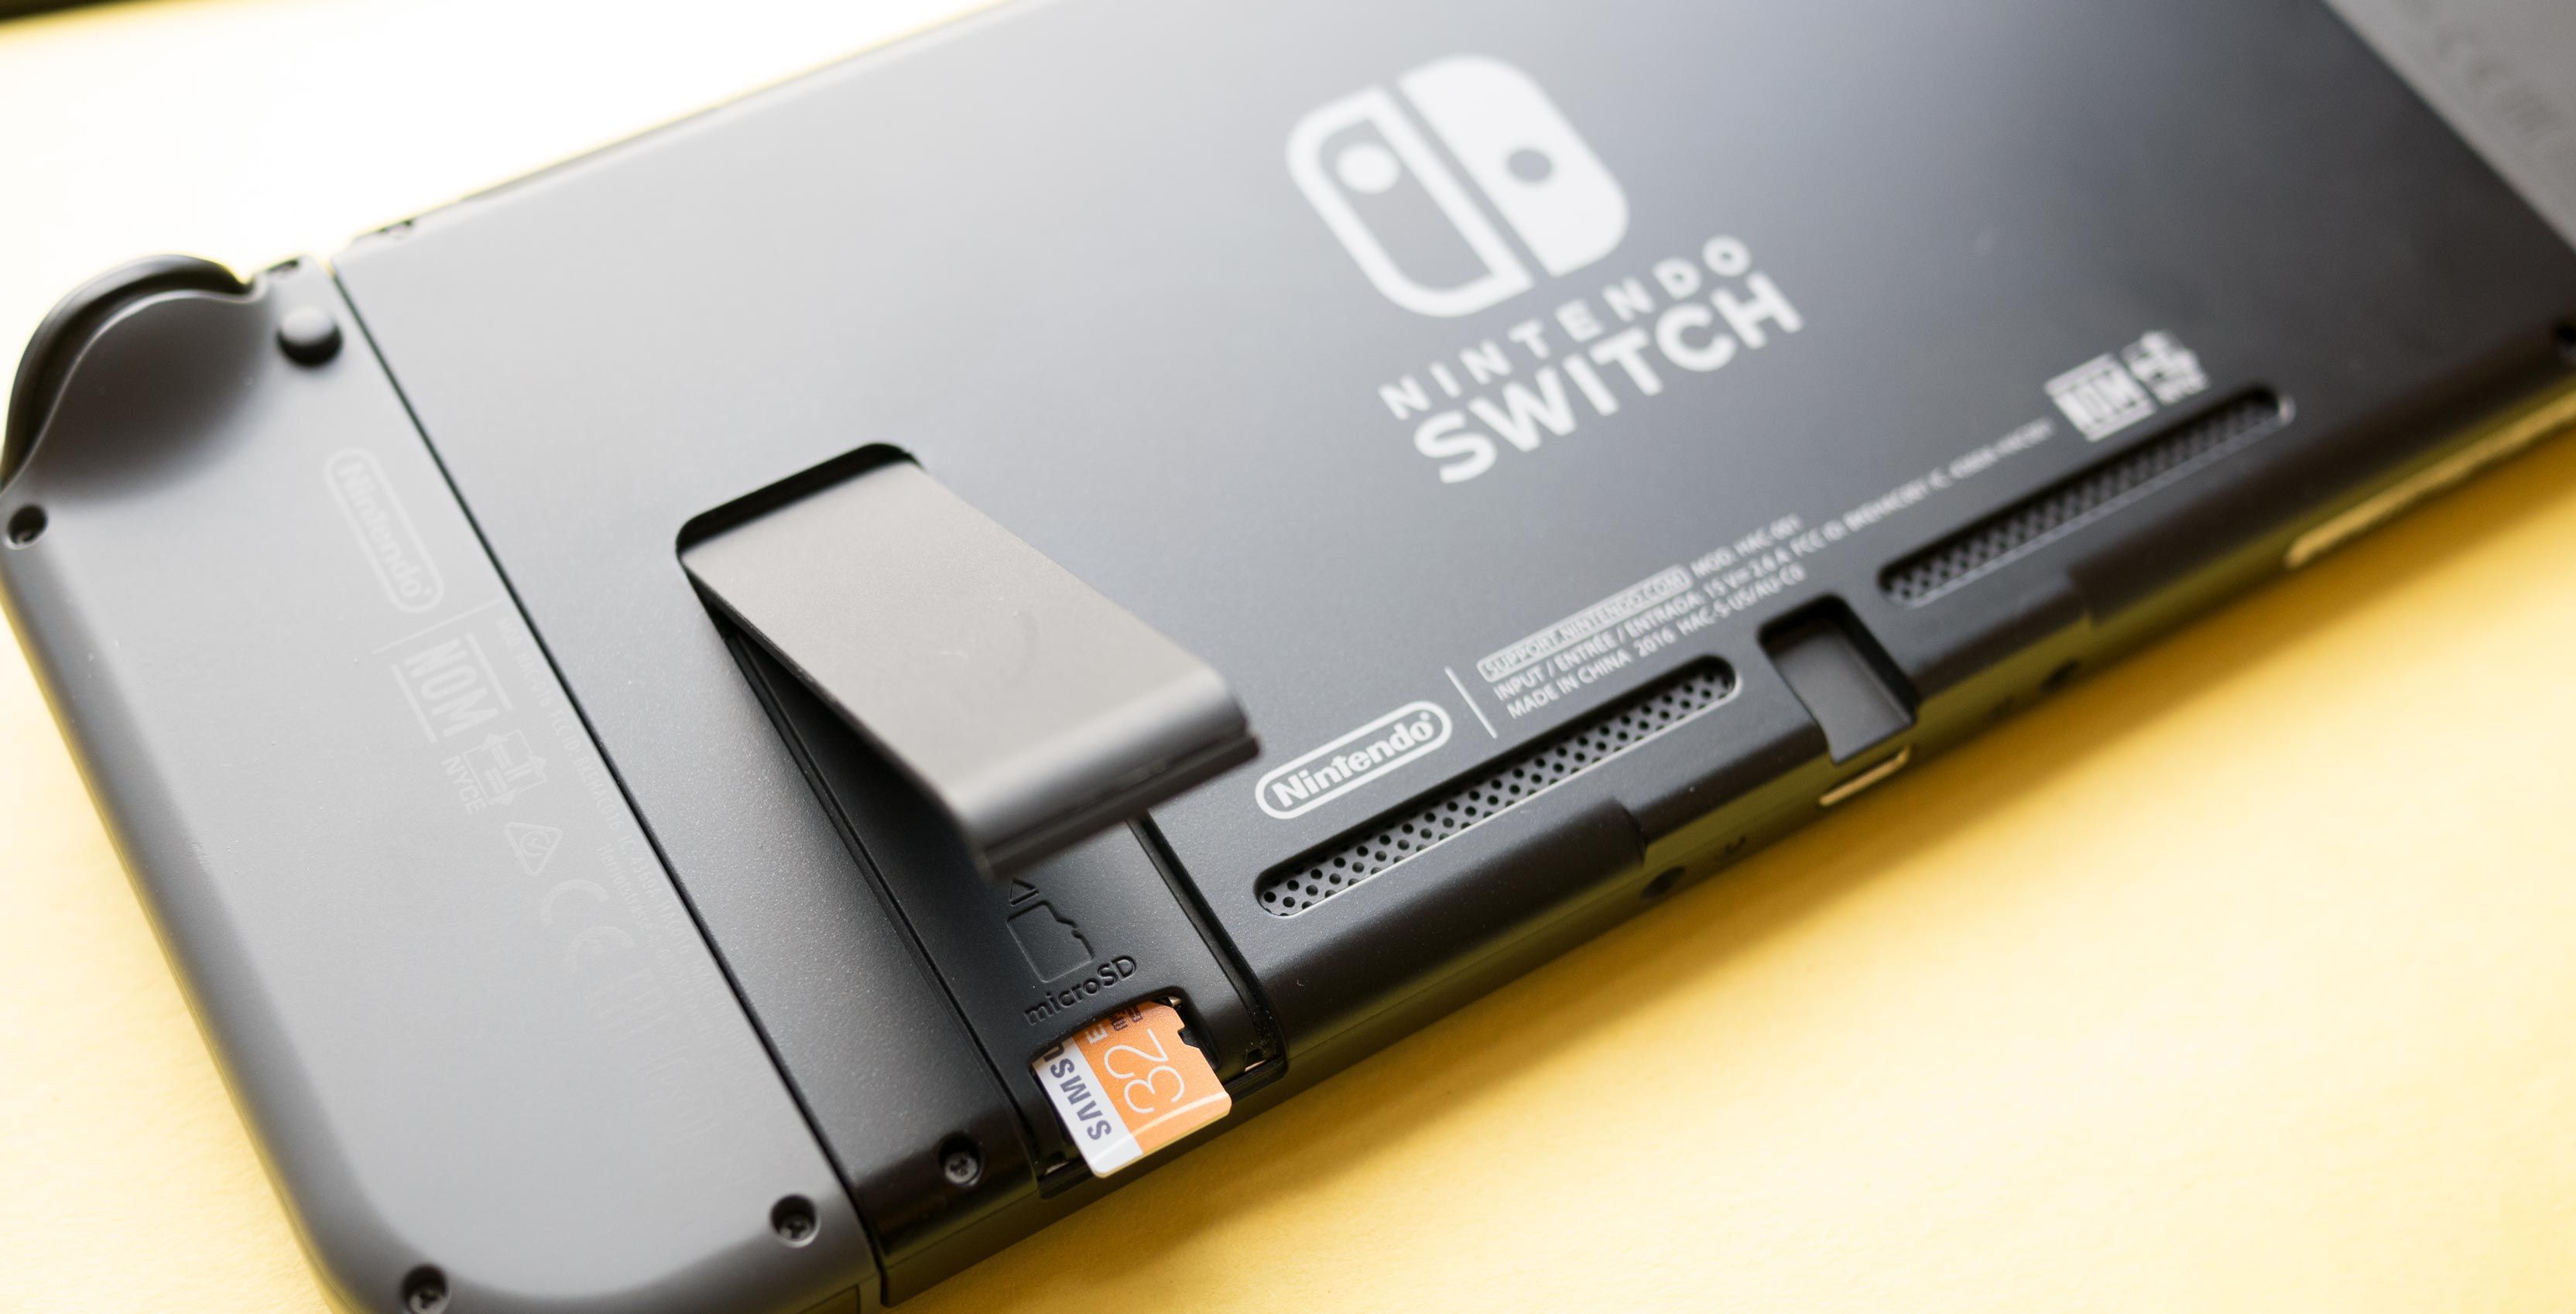 30 Things Only Super Fans Knew The Nintendo Switch Could Do